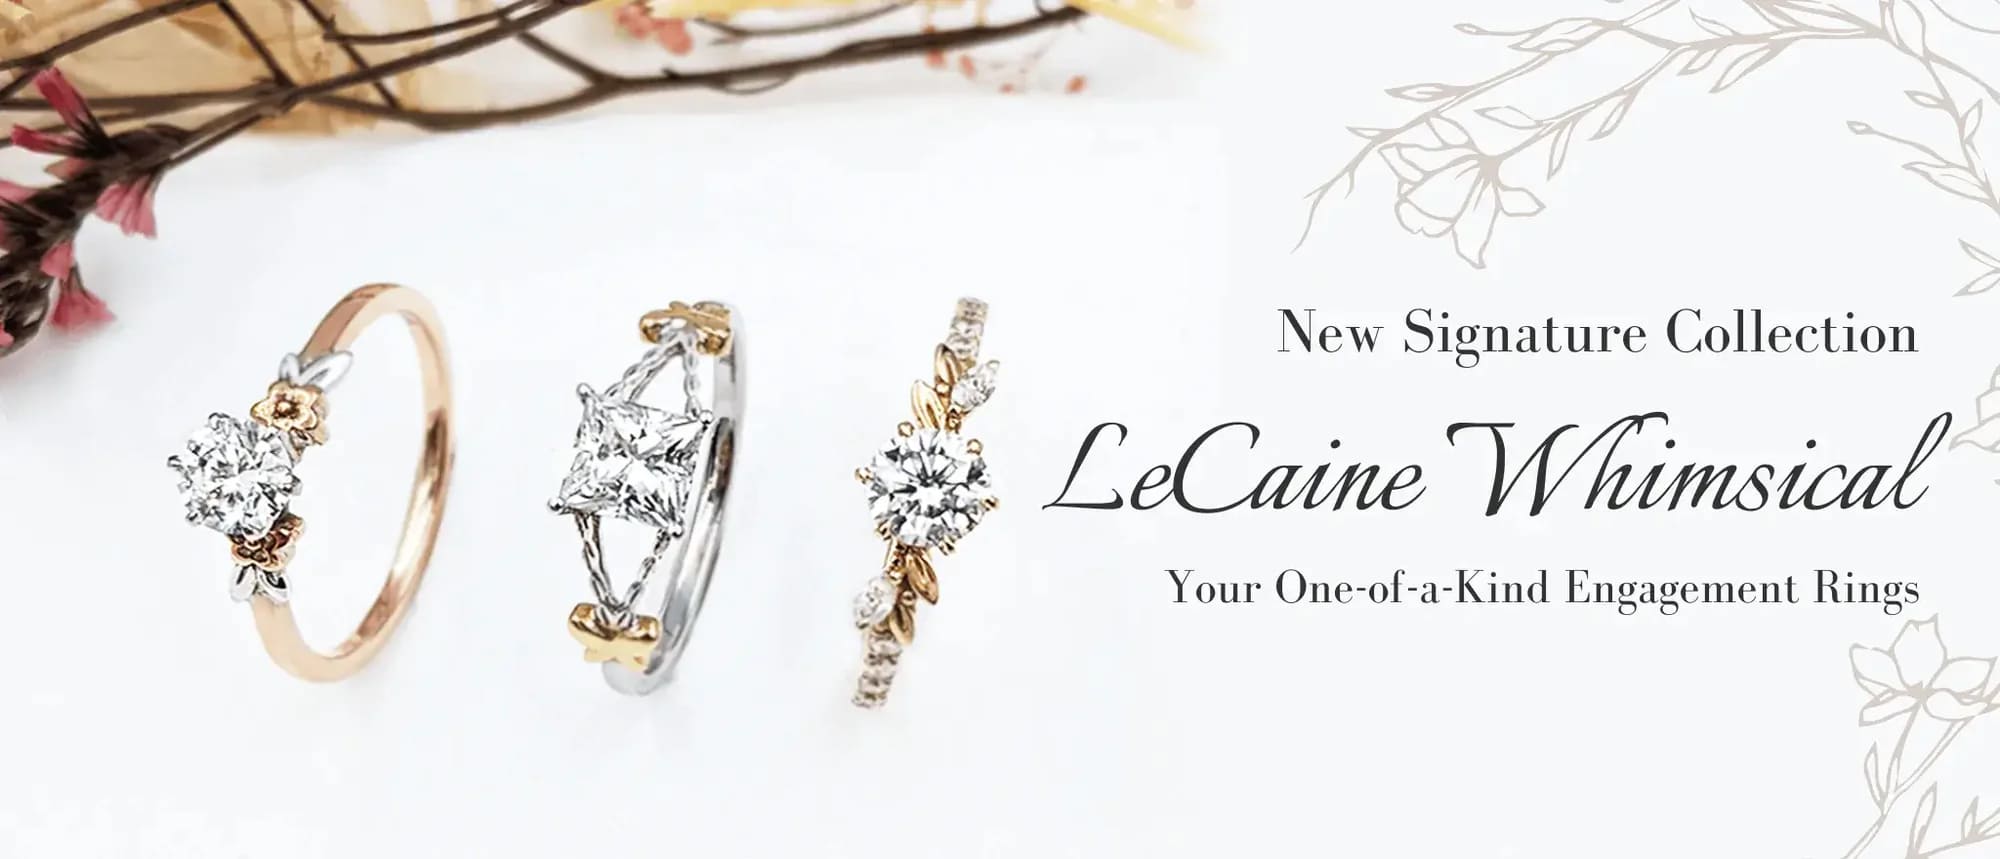 New Signature Whimsical Collection - Lecaine